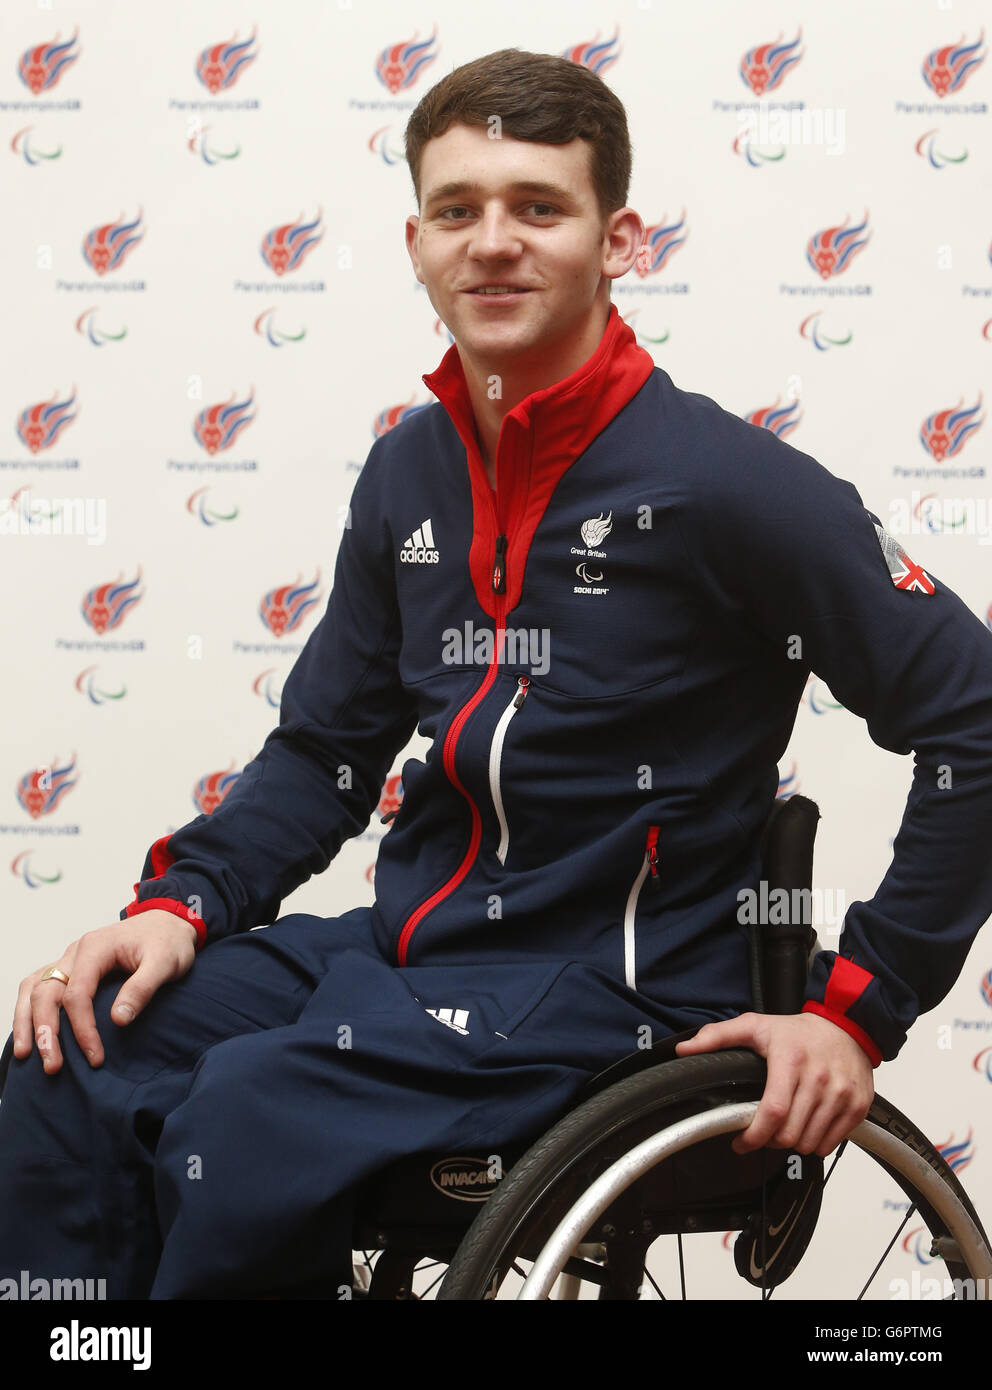 Alpine Skiing's Ben Sneesby during the Paralympic Team GB Launch for Sochi at the Radisson Blu Hotel, Glasgow. Stock Photo